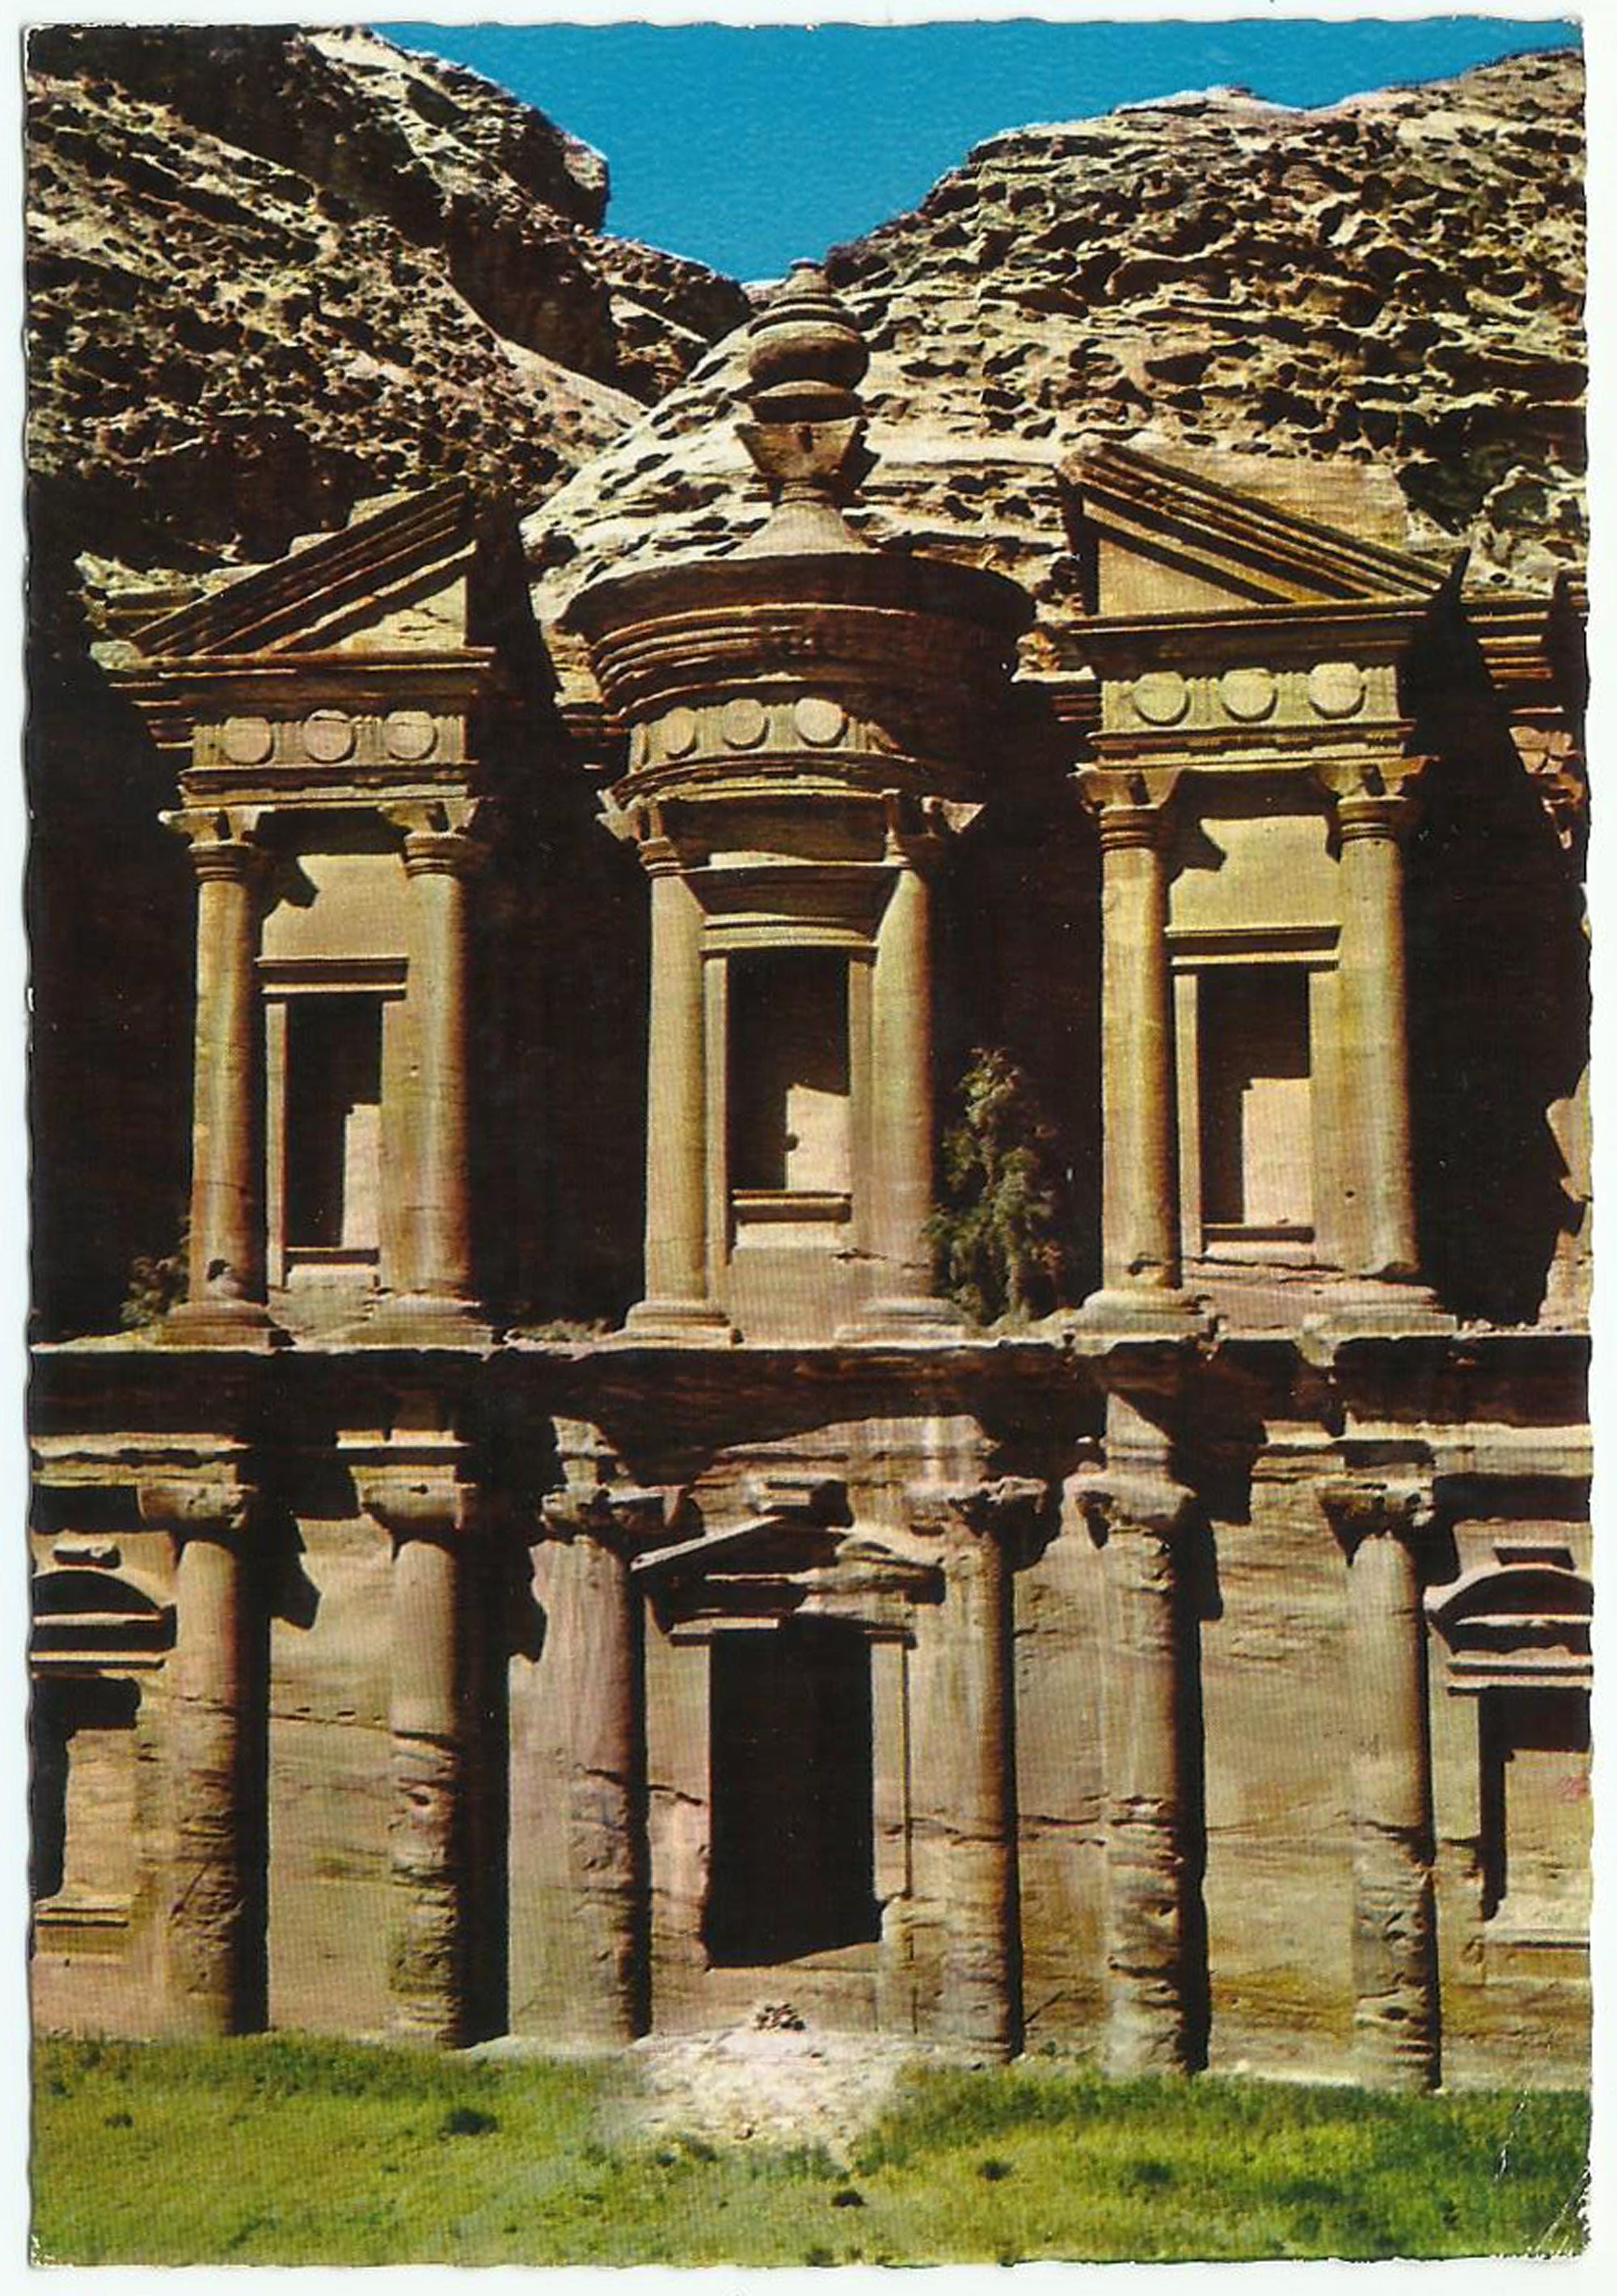 Petra Jordan Vintage Postcard Monastry in Archaeological picture pic